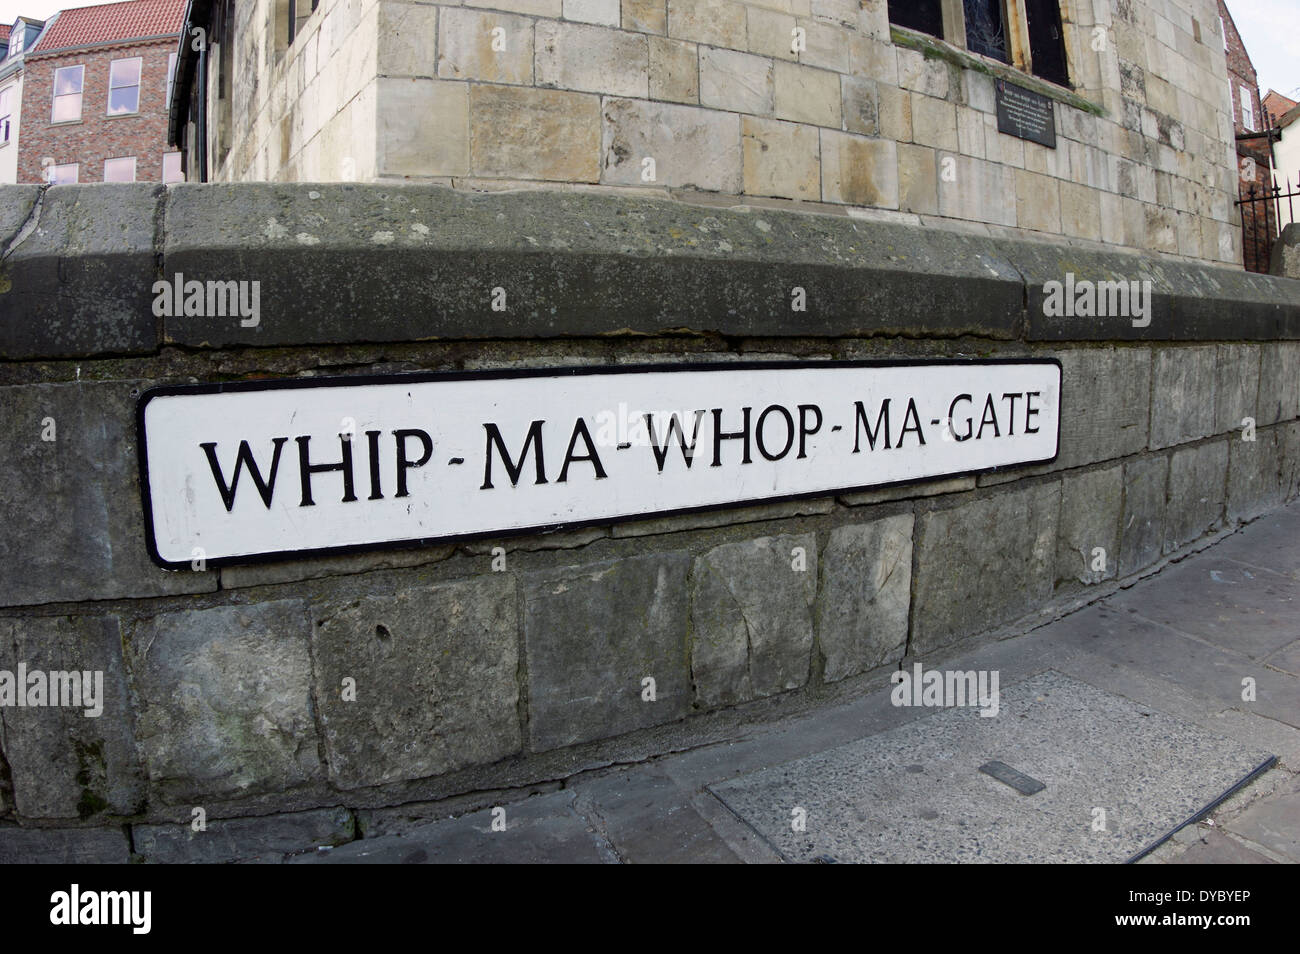 -Whip-Ma Whop-Ma-Gate Street Sign in New York. Le Yorkshire. UK Banque D'Images